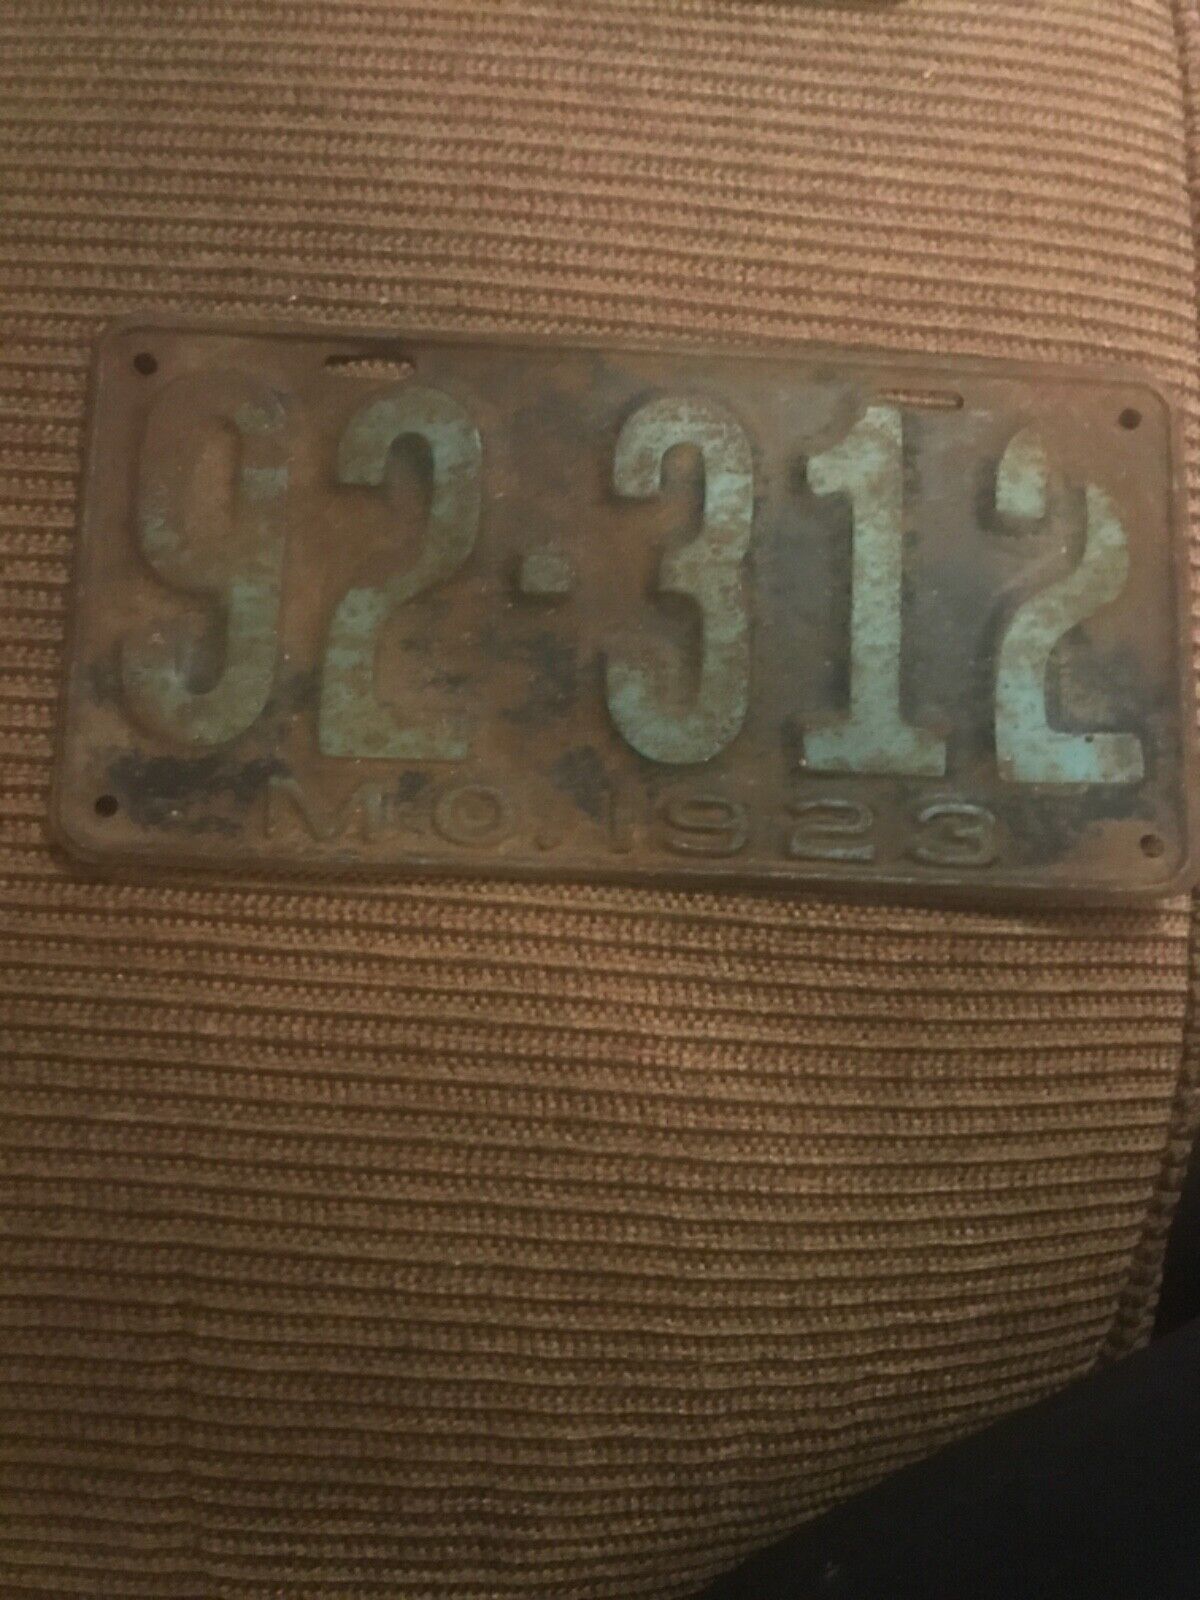 1923 Missouri license plate low number 92-312